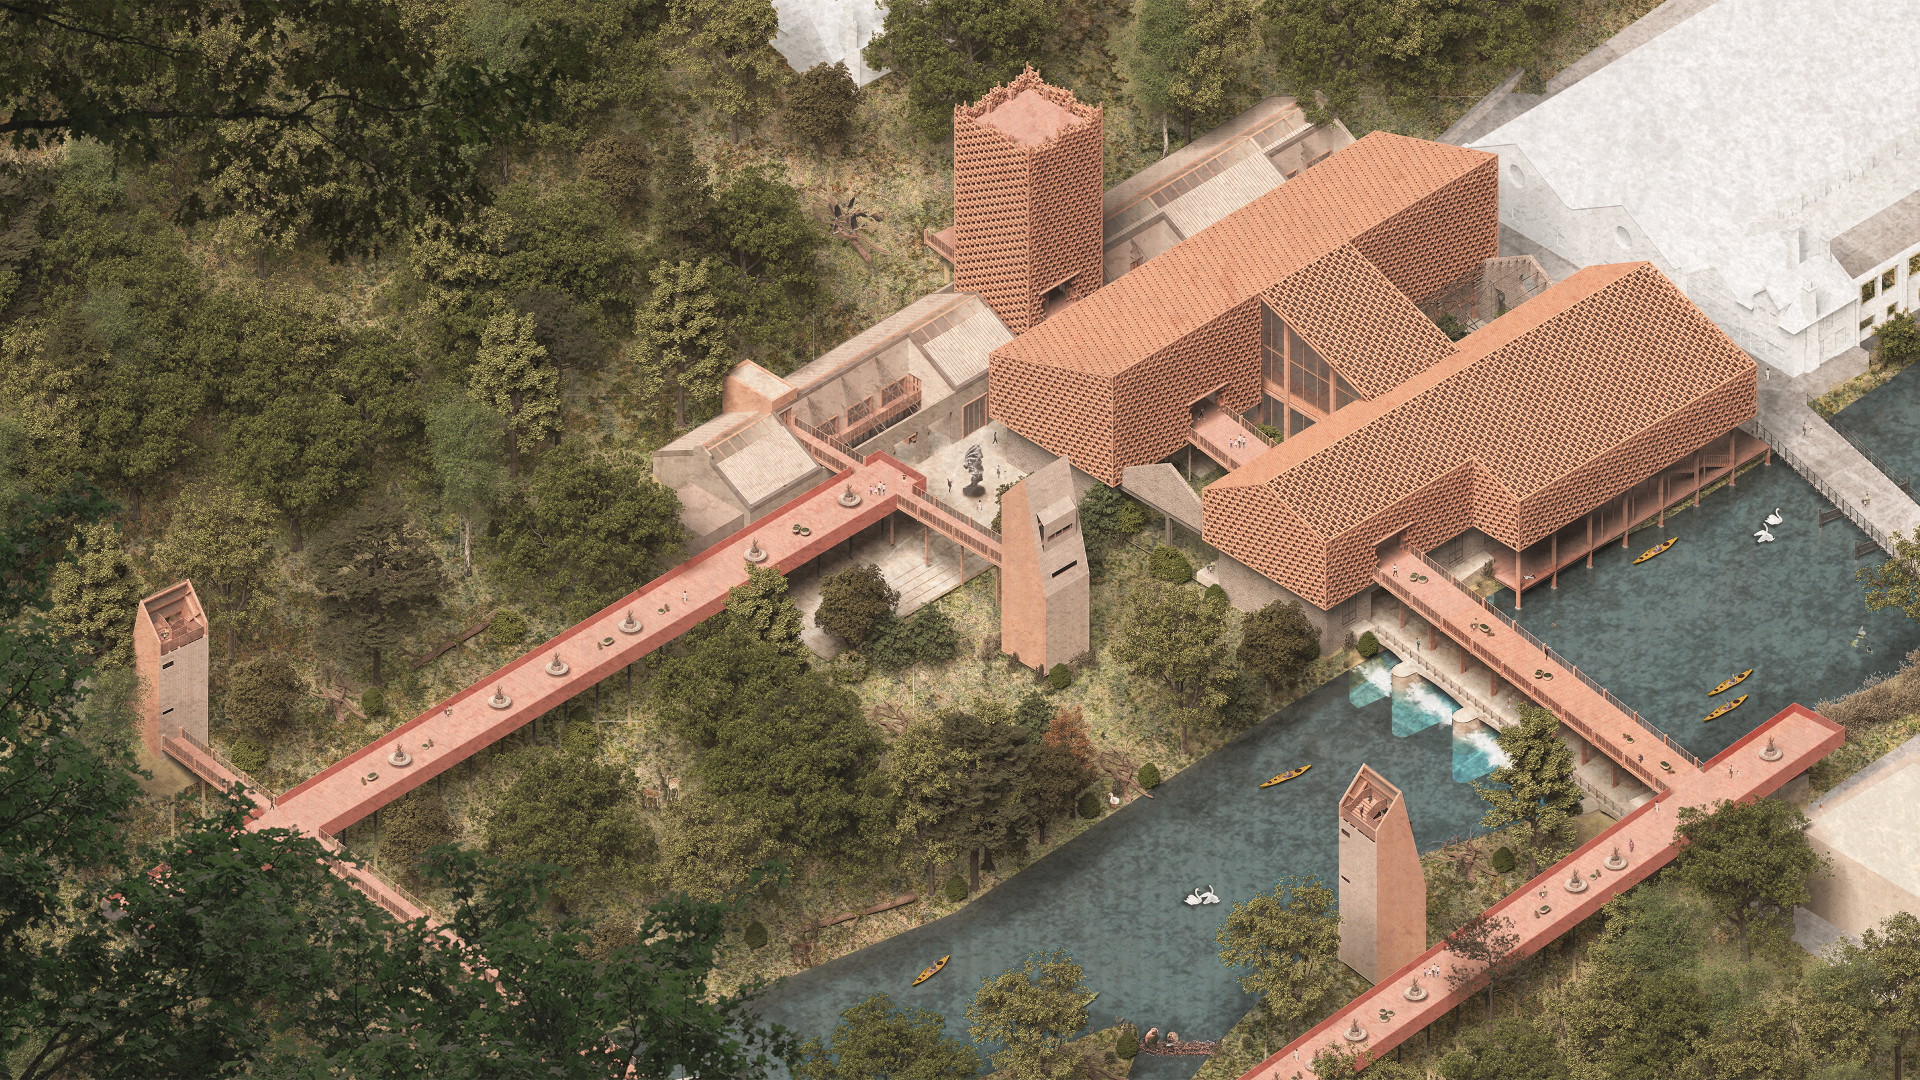 Isometric image of project